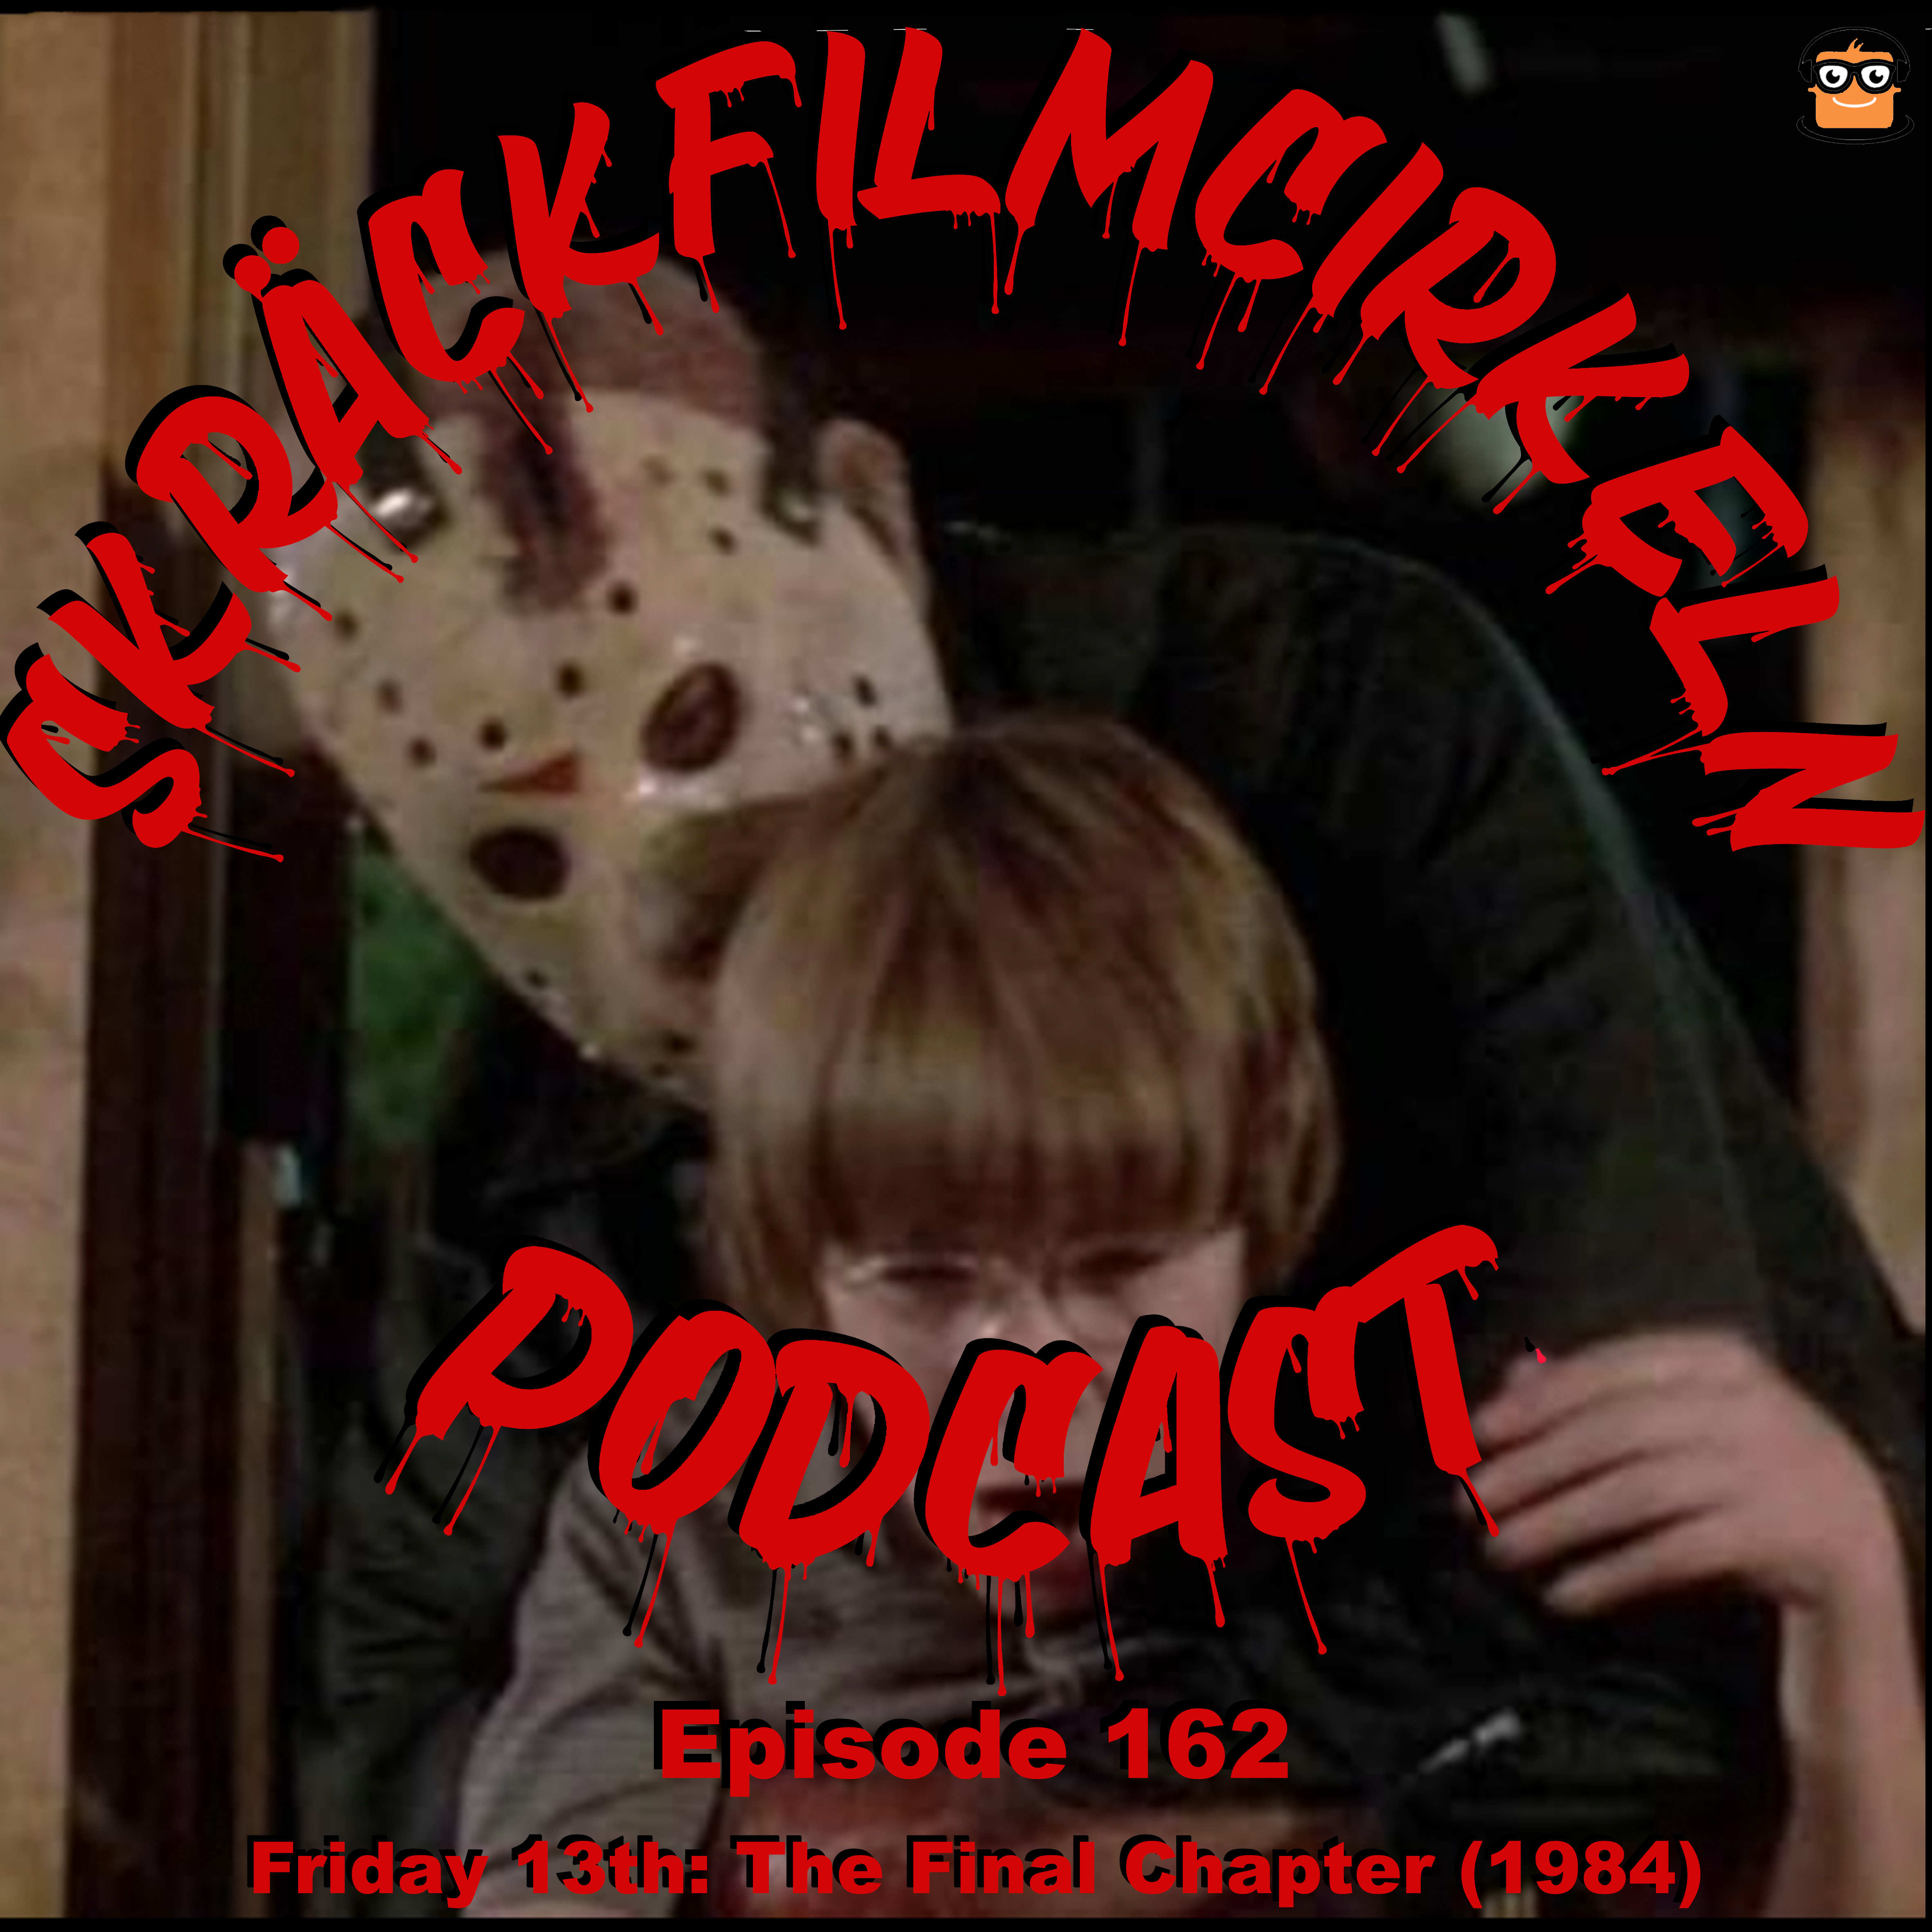 Episode 162 – Friday 13th – The Final Chapter (1984)